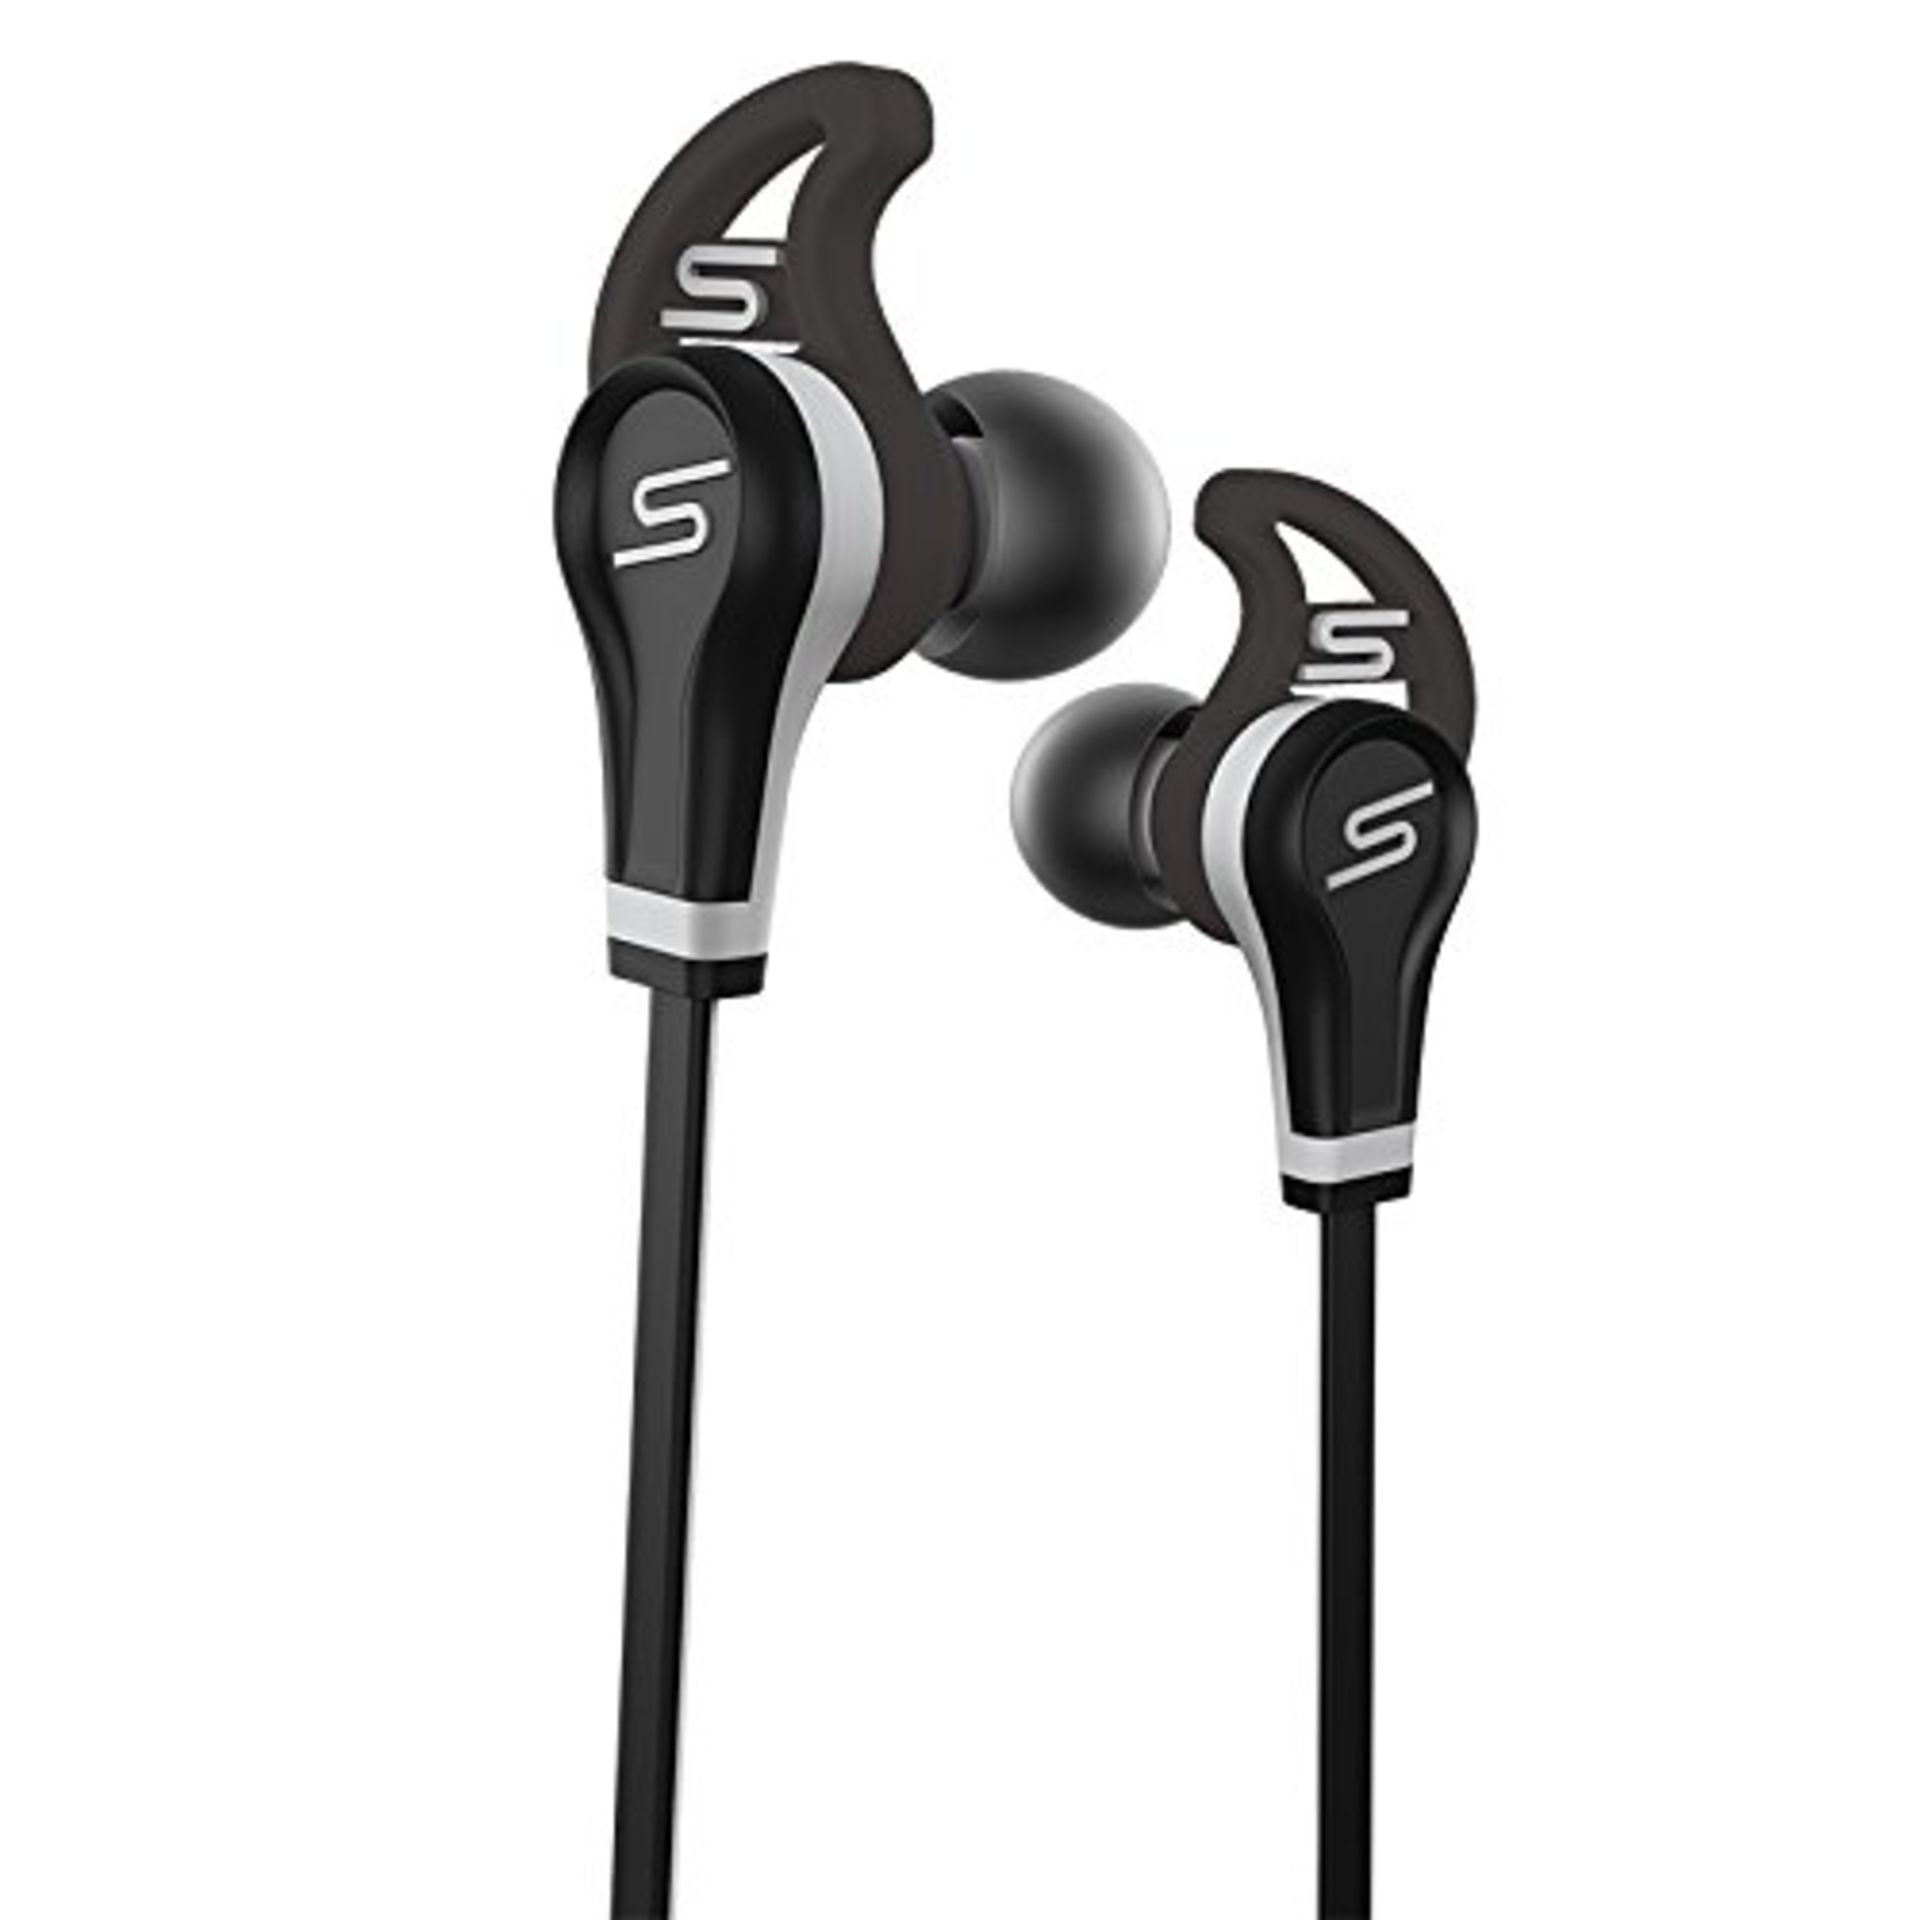 V Brand New SMS Audio Street By 50 Cent In-Ear Wiredsport Professionally tuned Performance Earphones